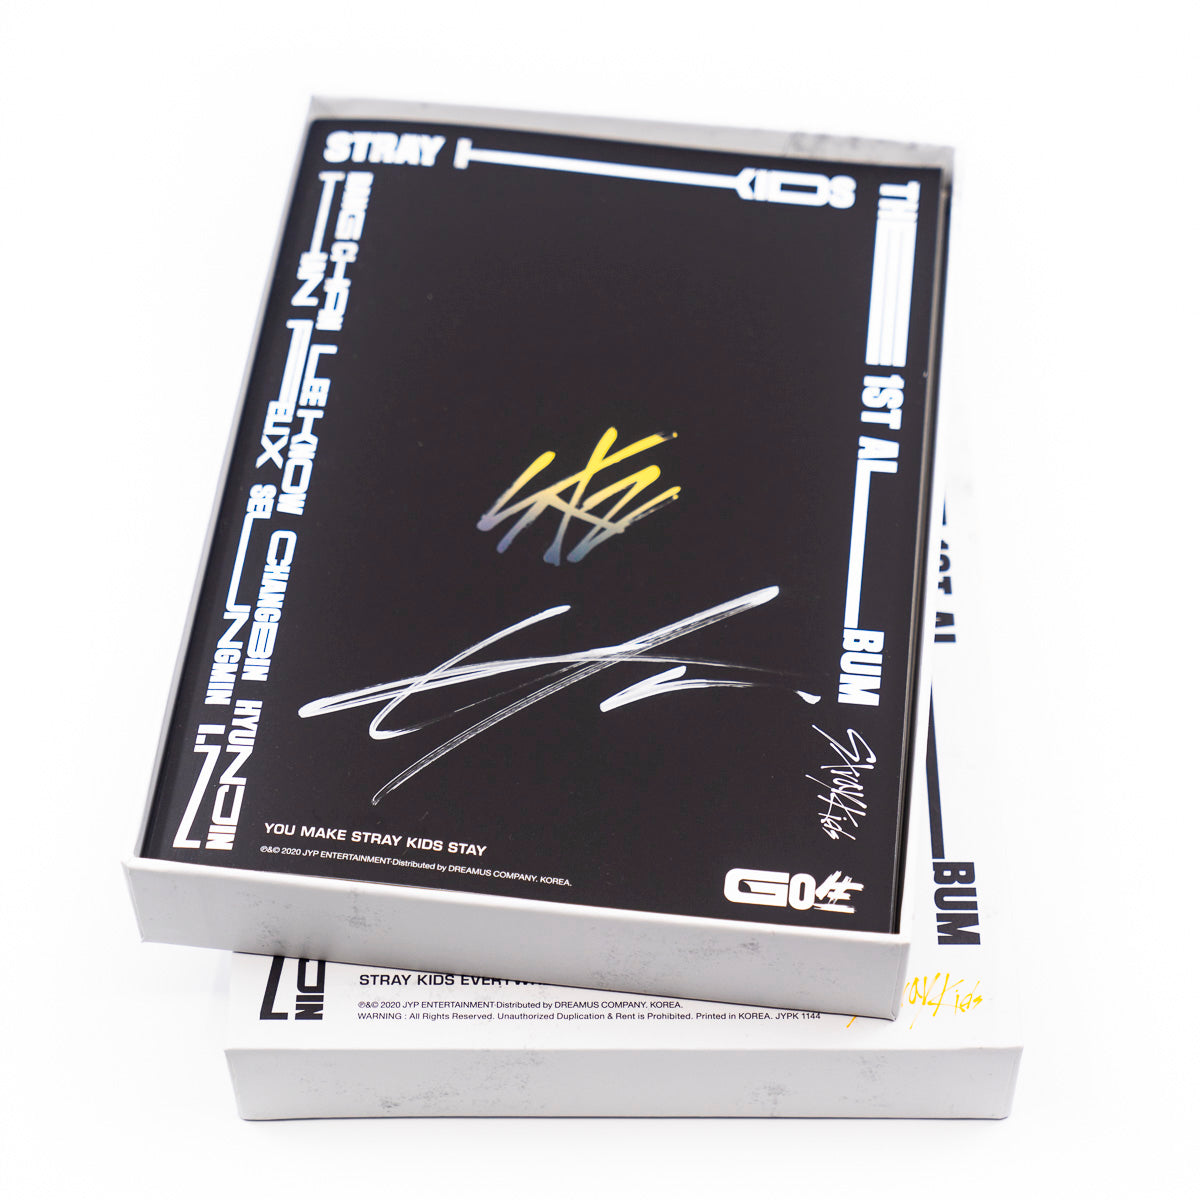 Win an authentic Stray Kids signed Album #2